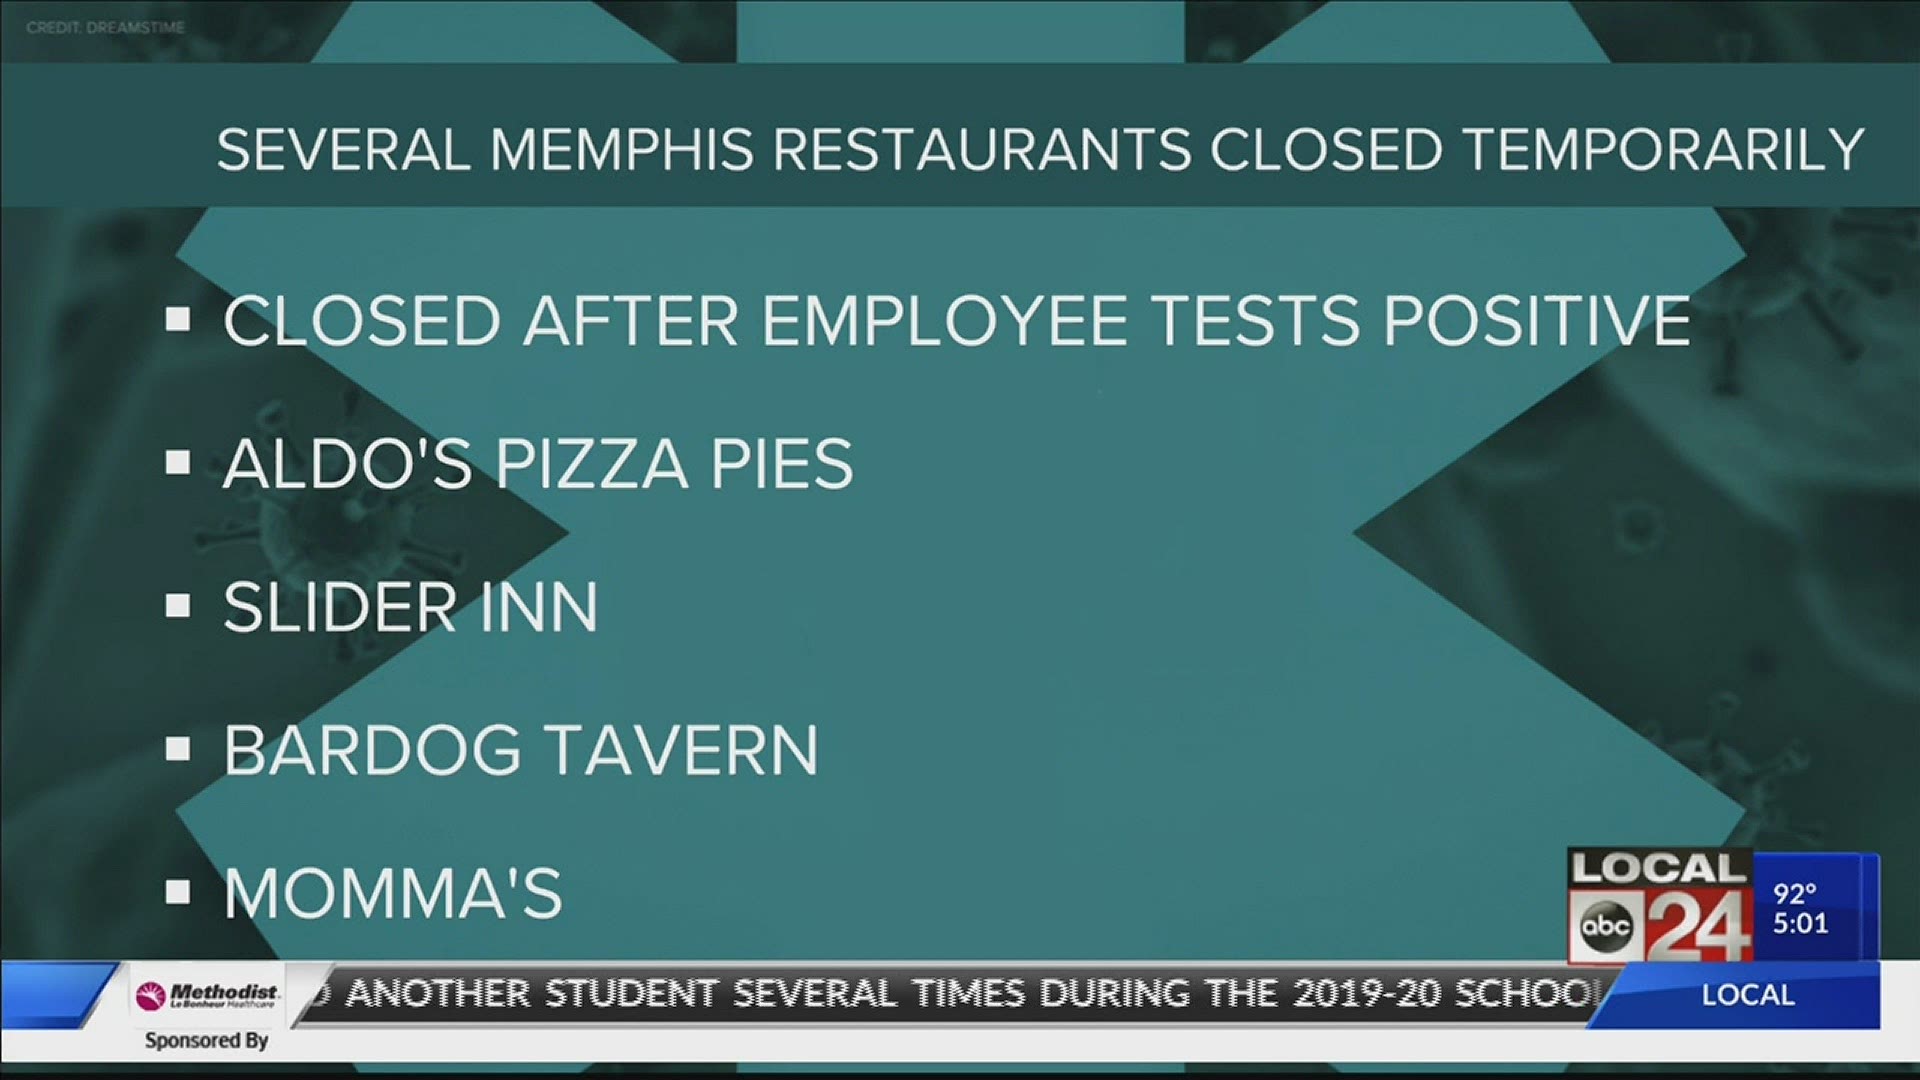 The restaurant group says every employee will be tested while the restaurants are closed.